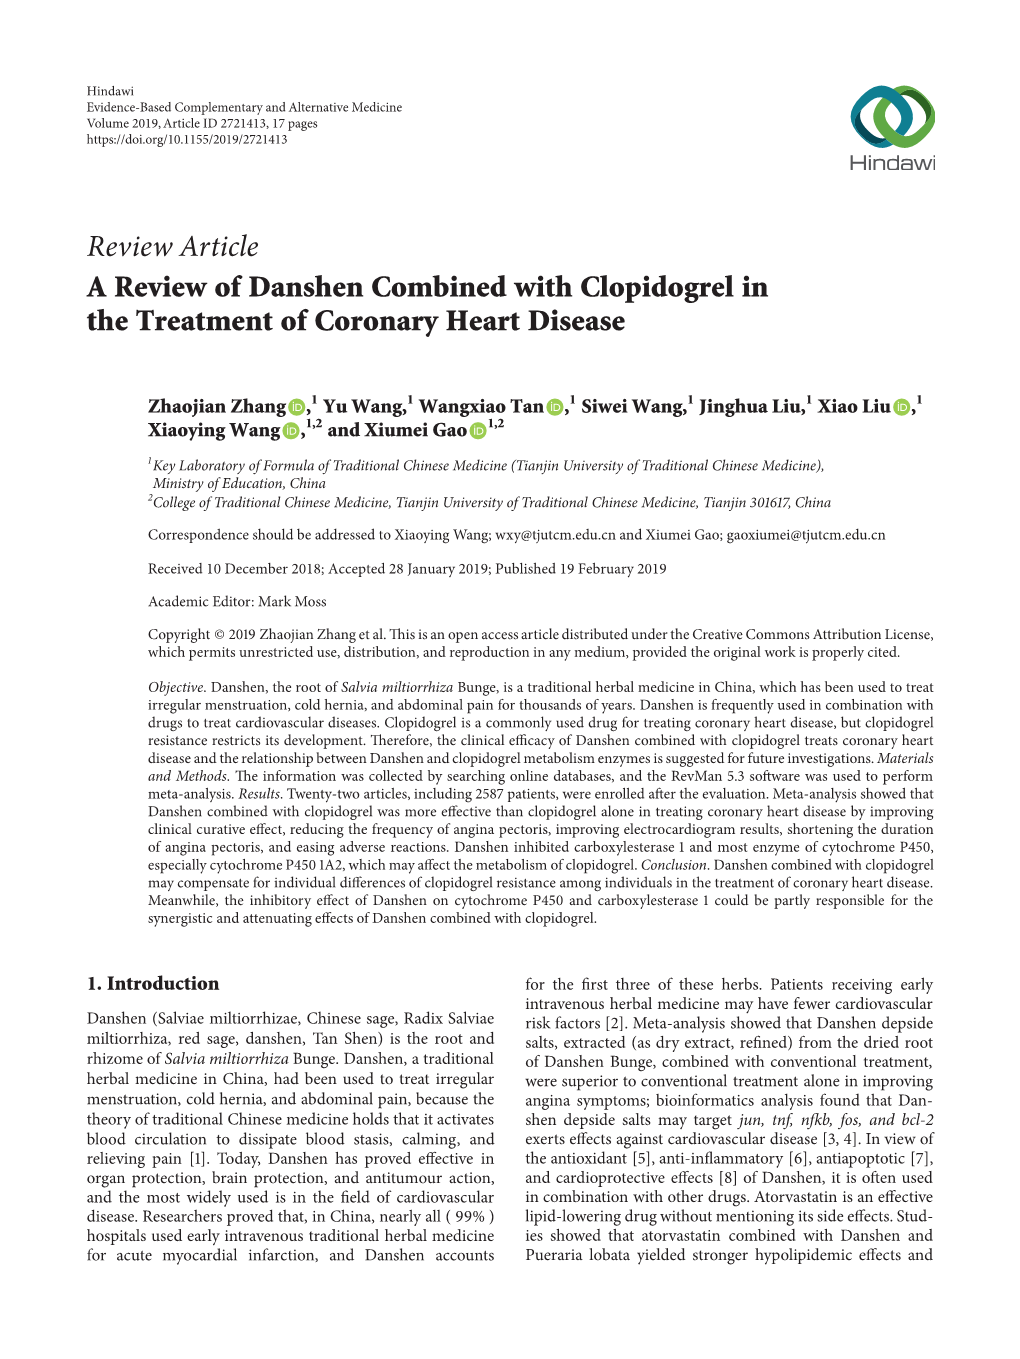 A Review of Danshen Combined with Clopidogrel in the Treatment of Coronary Heart Disease